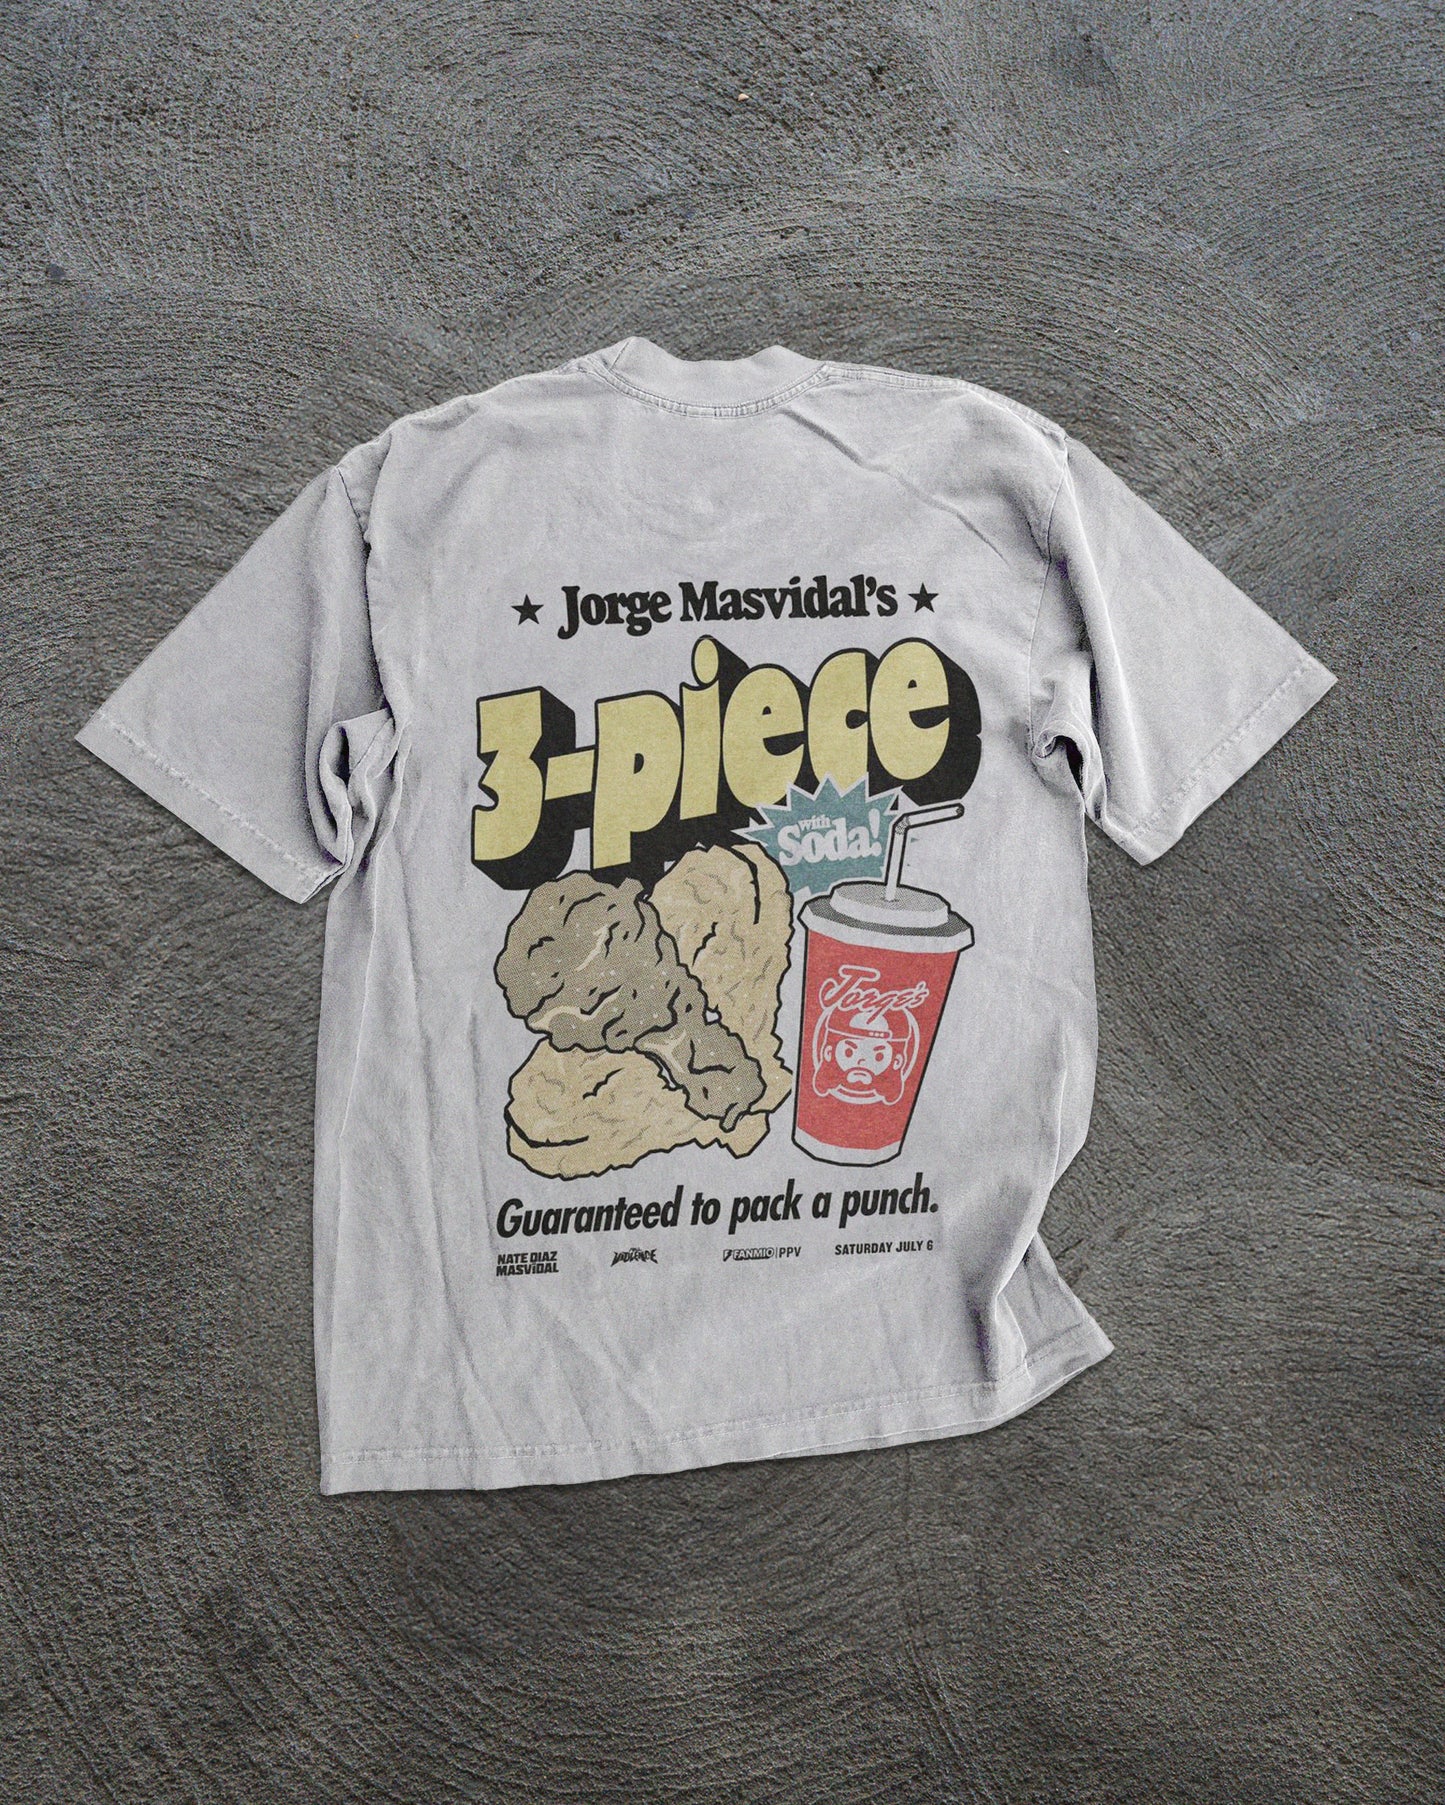 3 Piece and Soda "Premium" Tee in Off-White